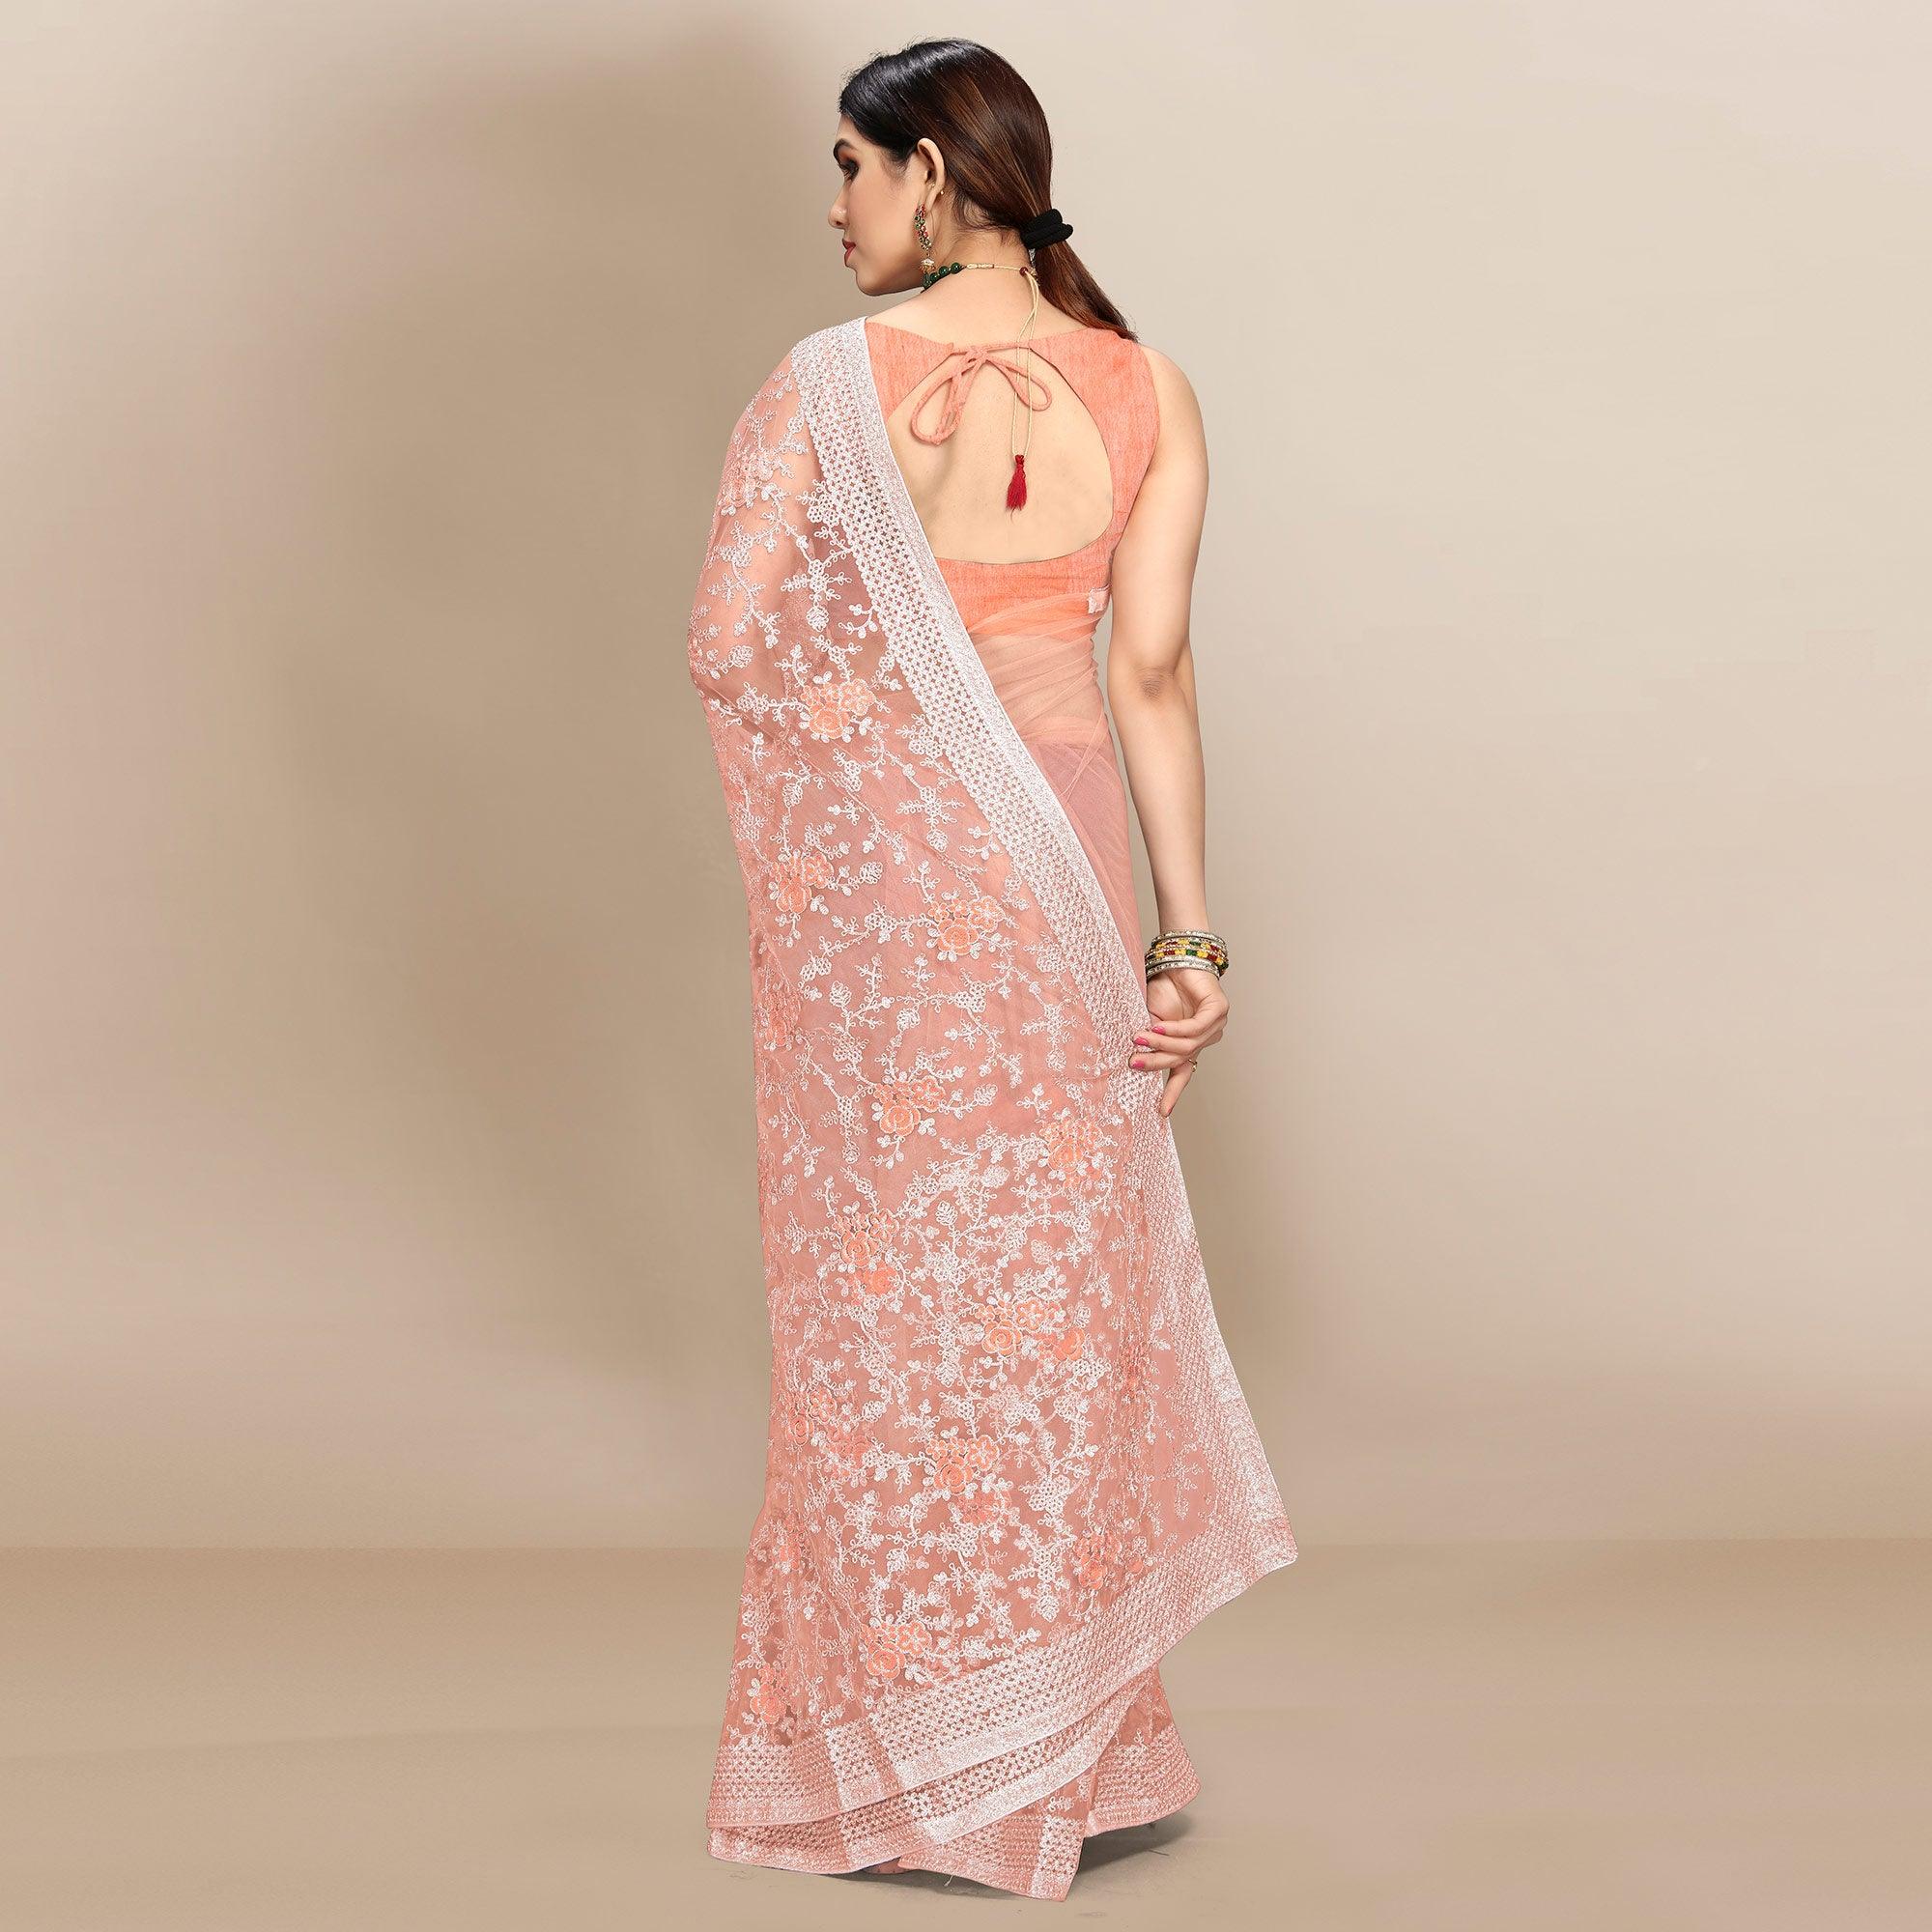 Peach Partywear Floral Embroidered Soft Net Saree - Peachmode